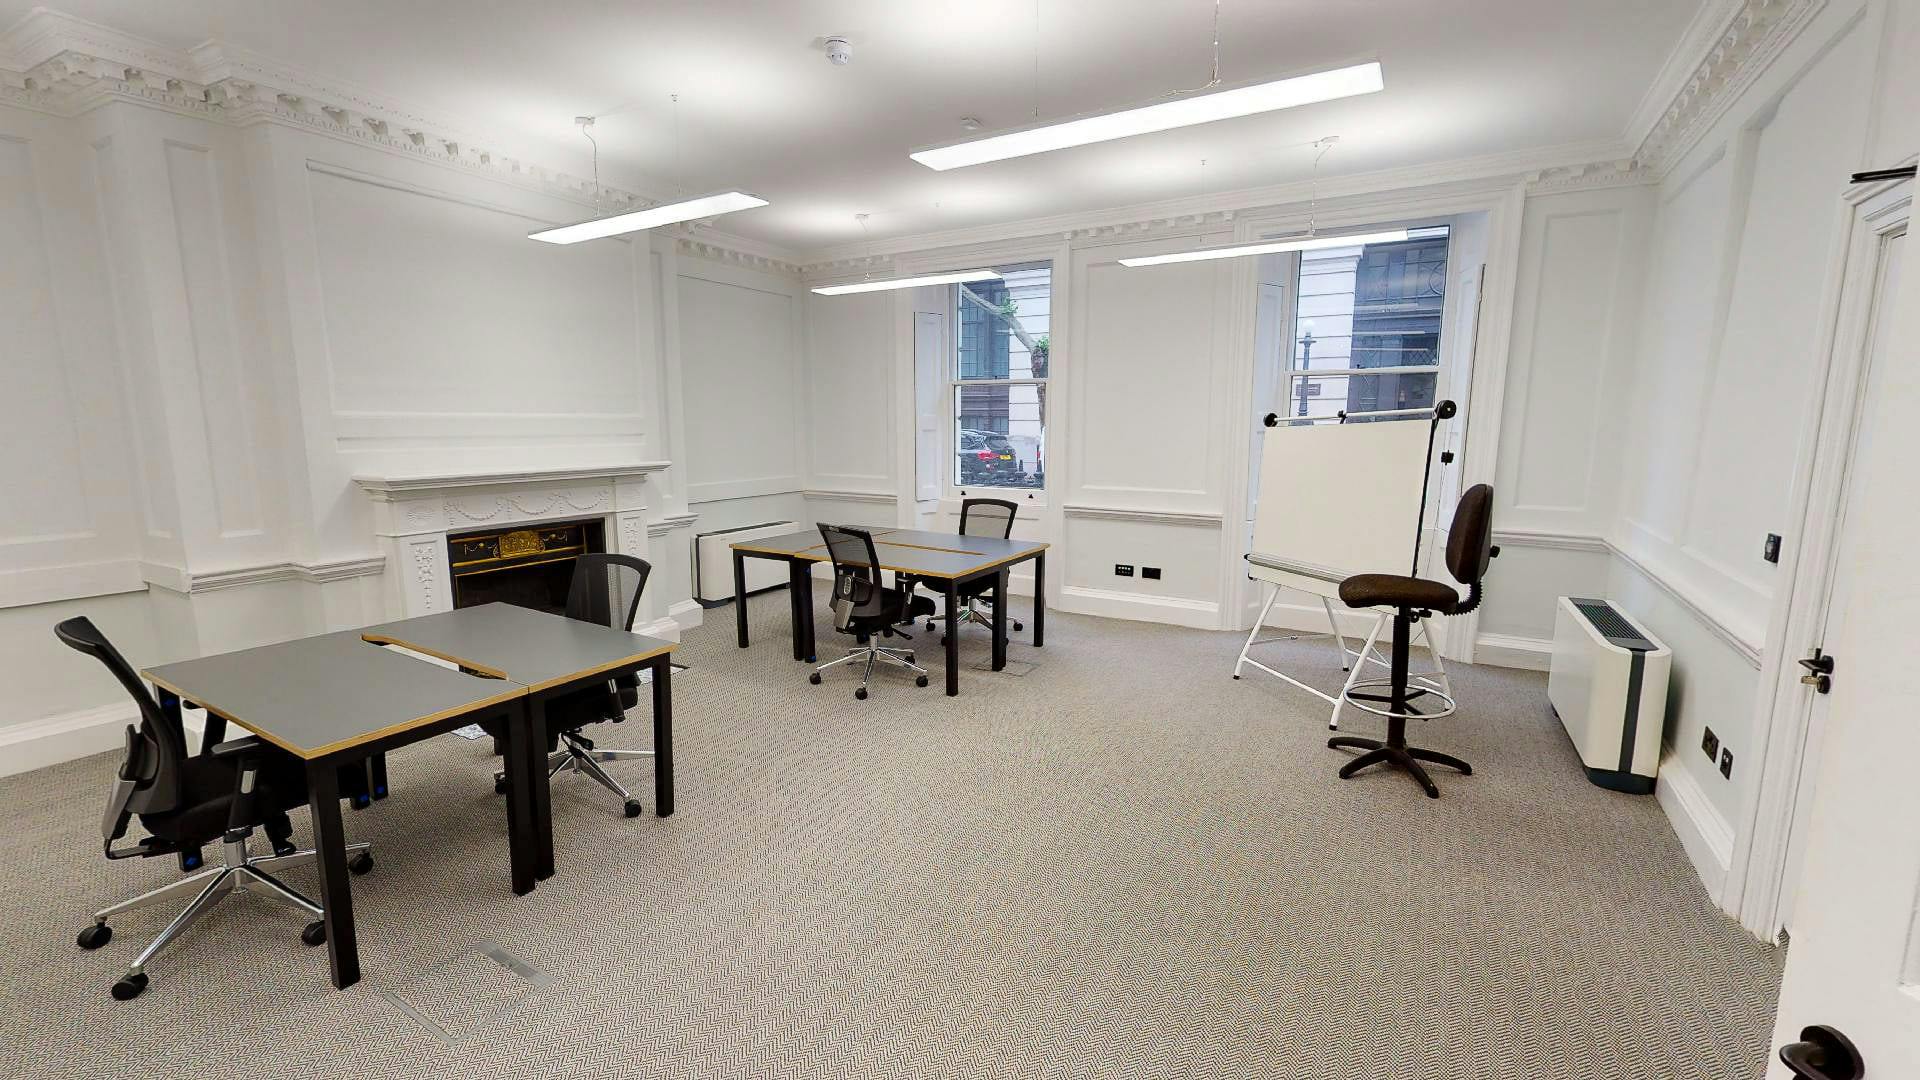 Holborn - 8 Person Office - Bloomsbury Place